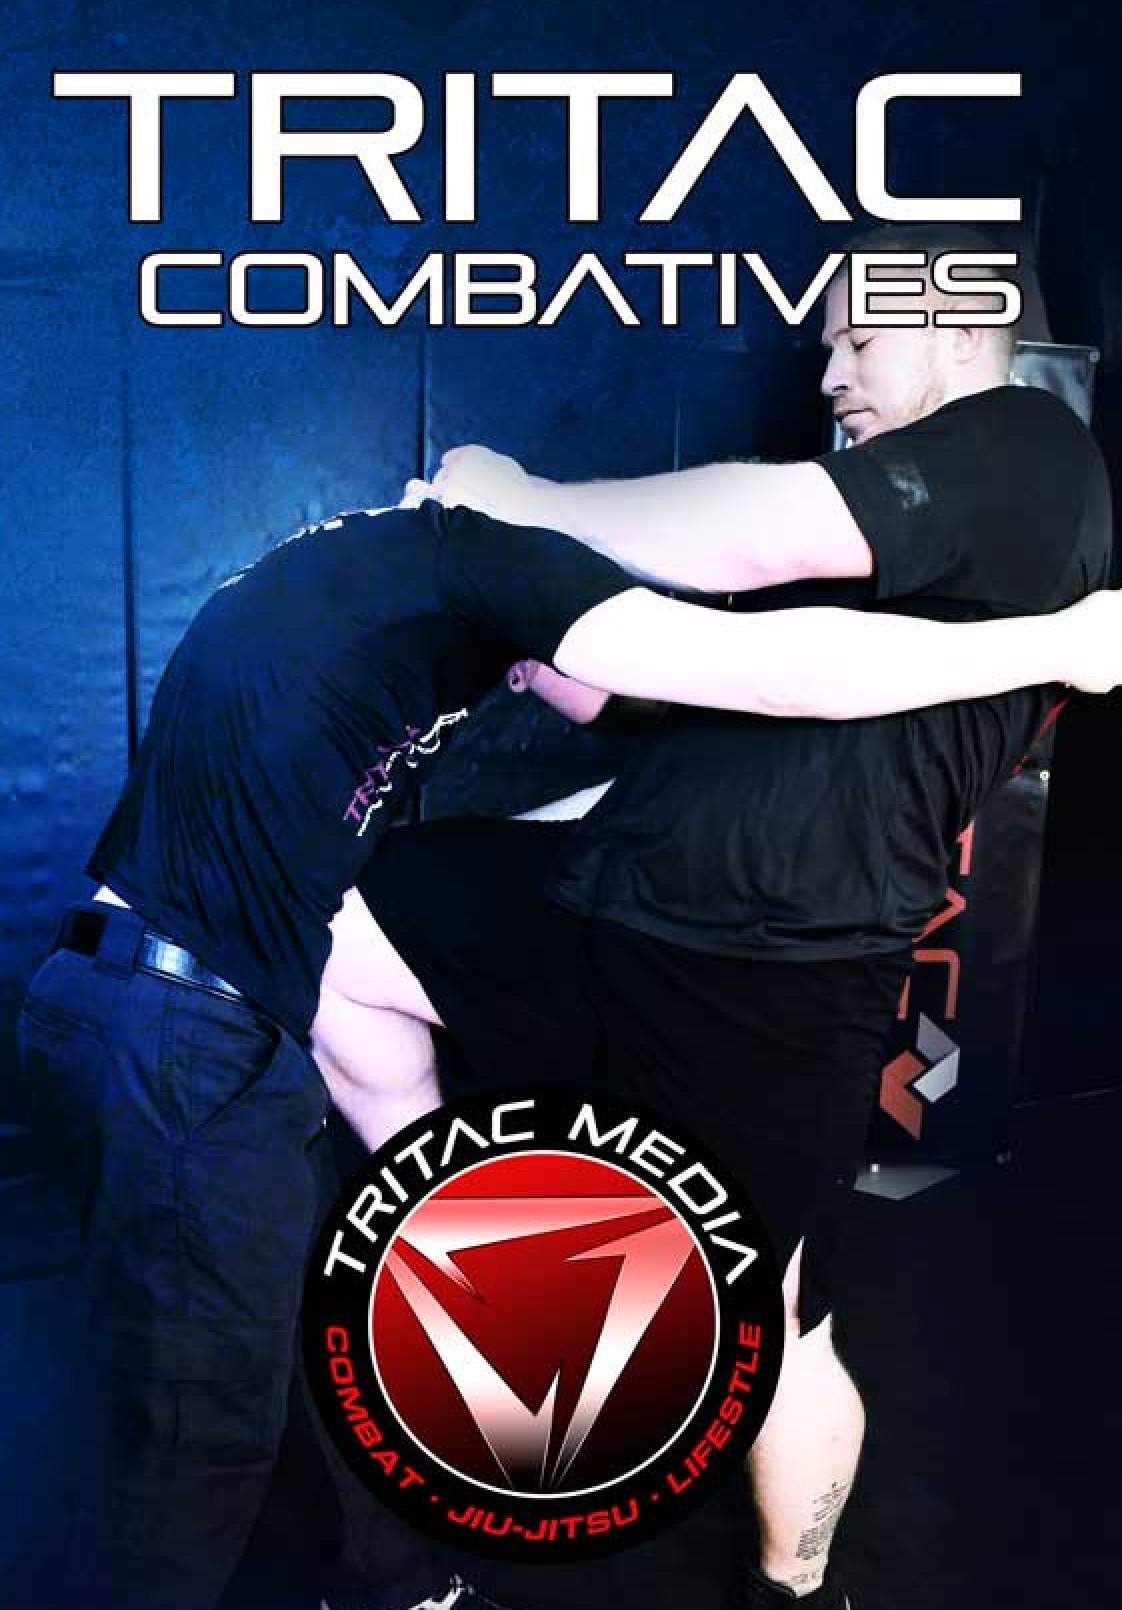 Tritac Combatives DVD (Preowned)